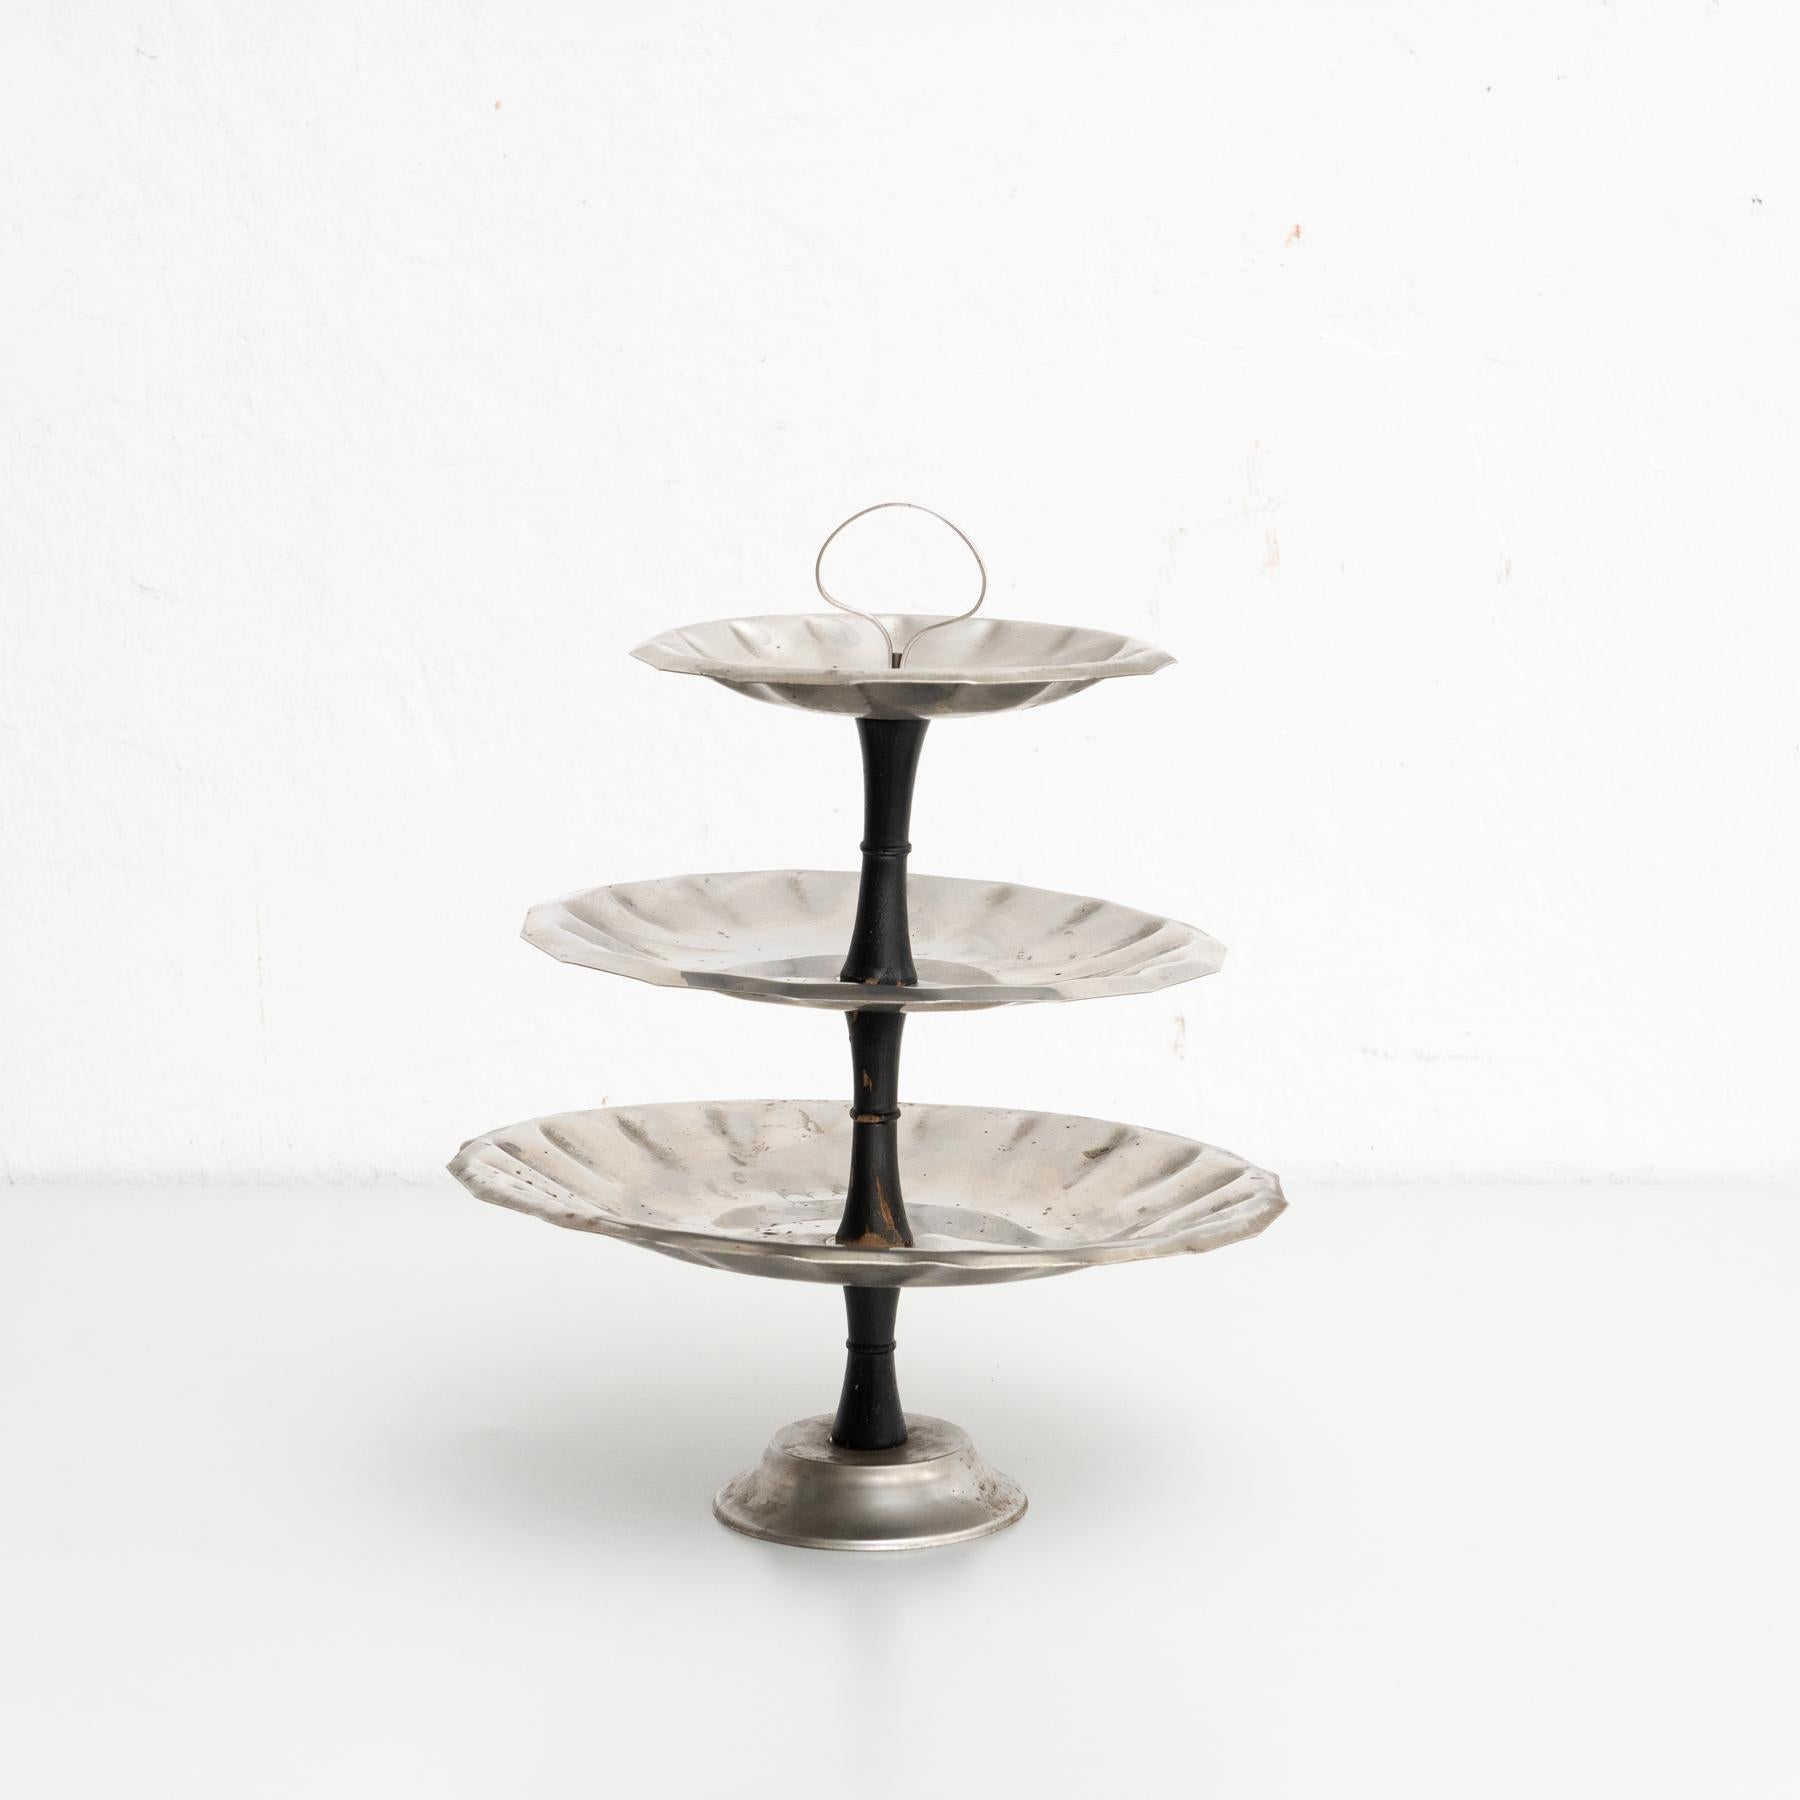 Three tier metal dessert plate from France.

Made by unknown manufacturer, early 20th century.

In original condition, with minor wear consistent with age and use, preserving a beautiful patina.

Material:
Metal.
 